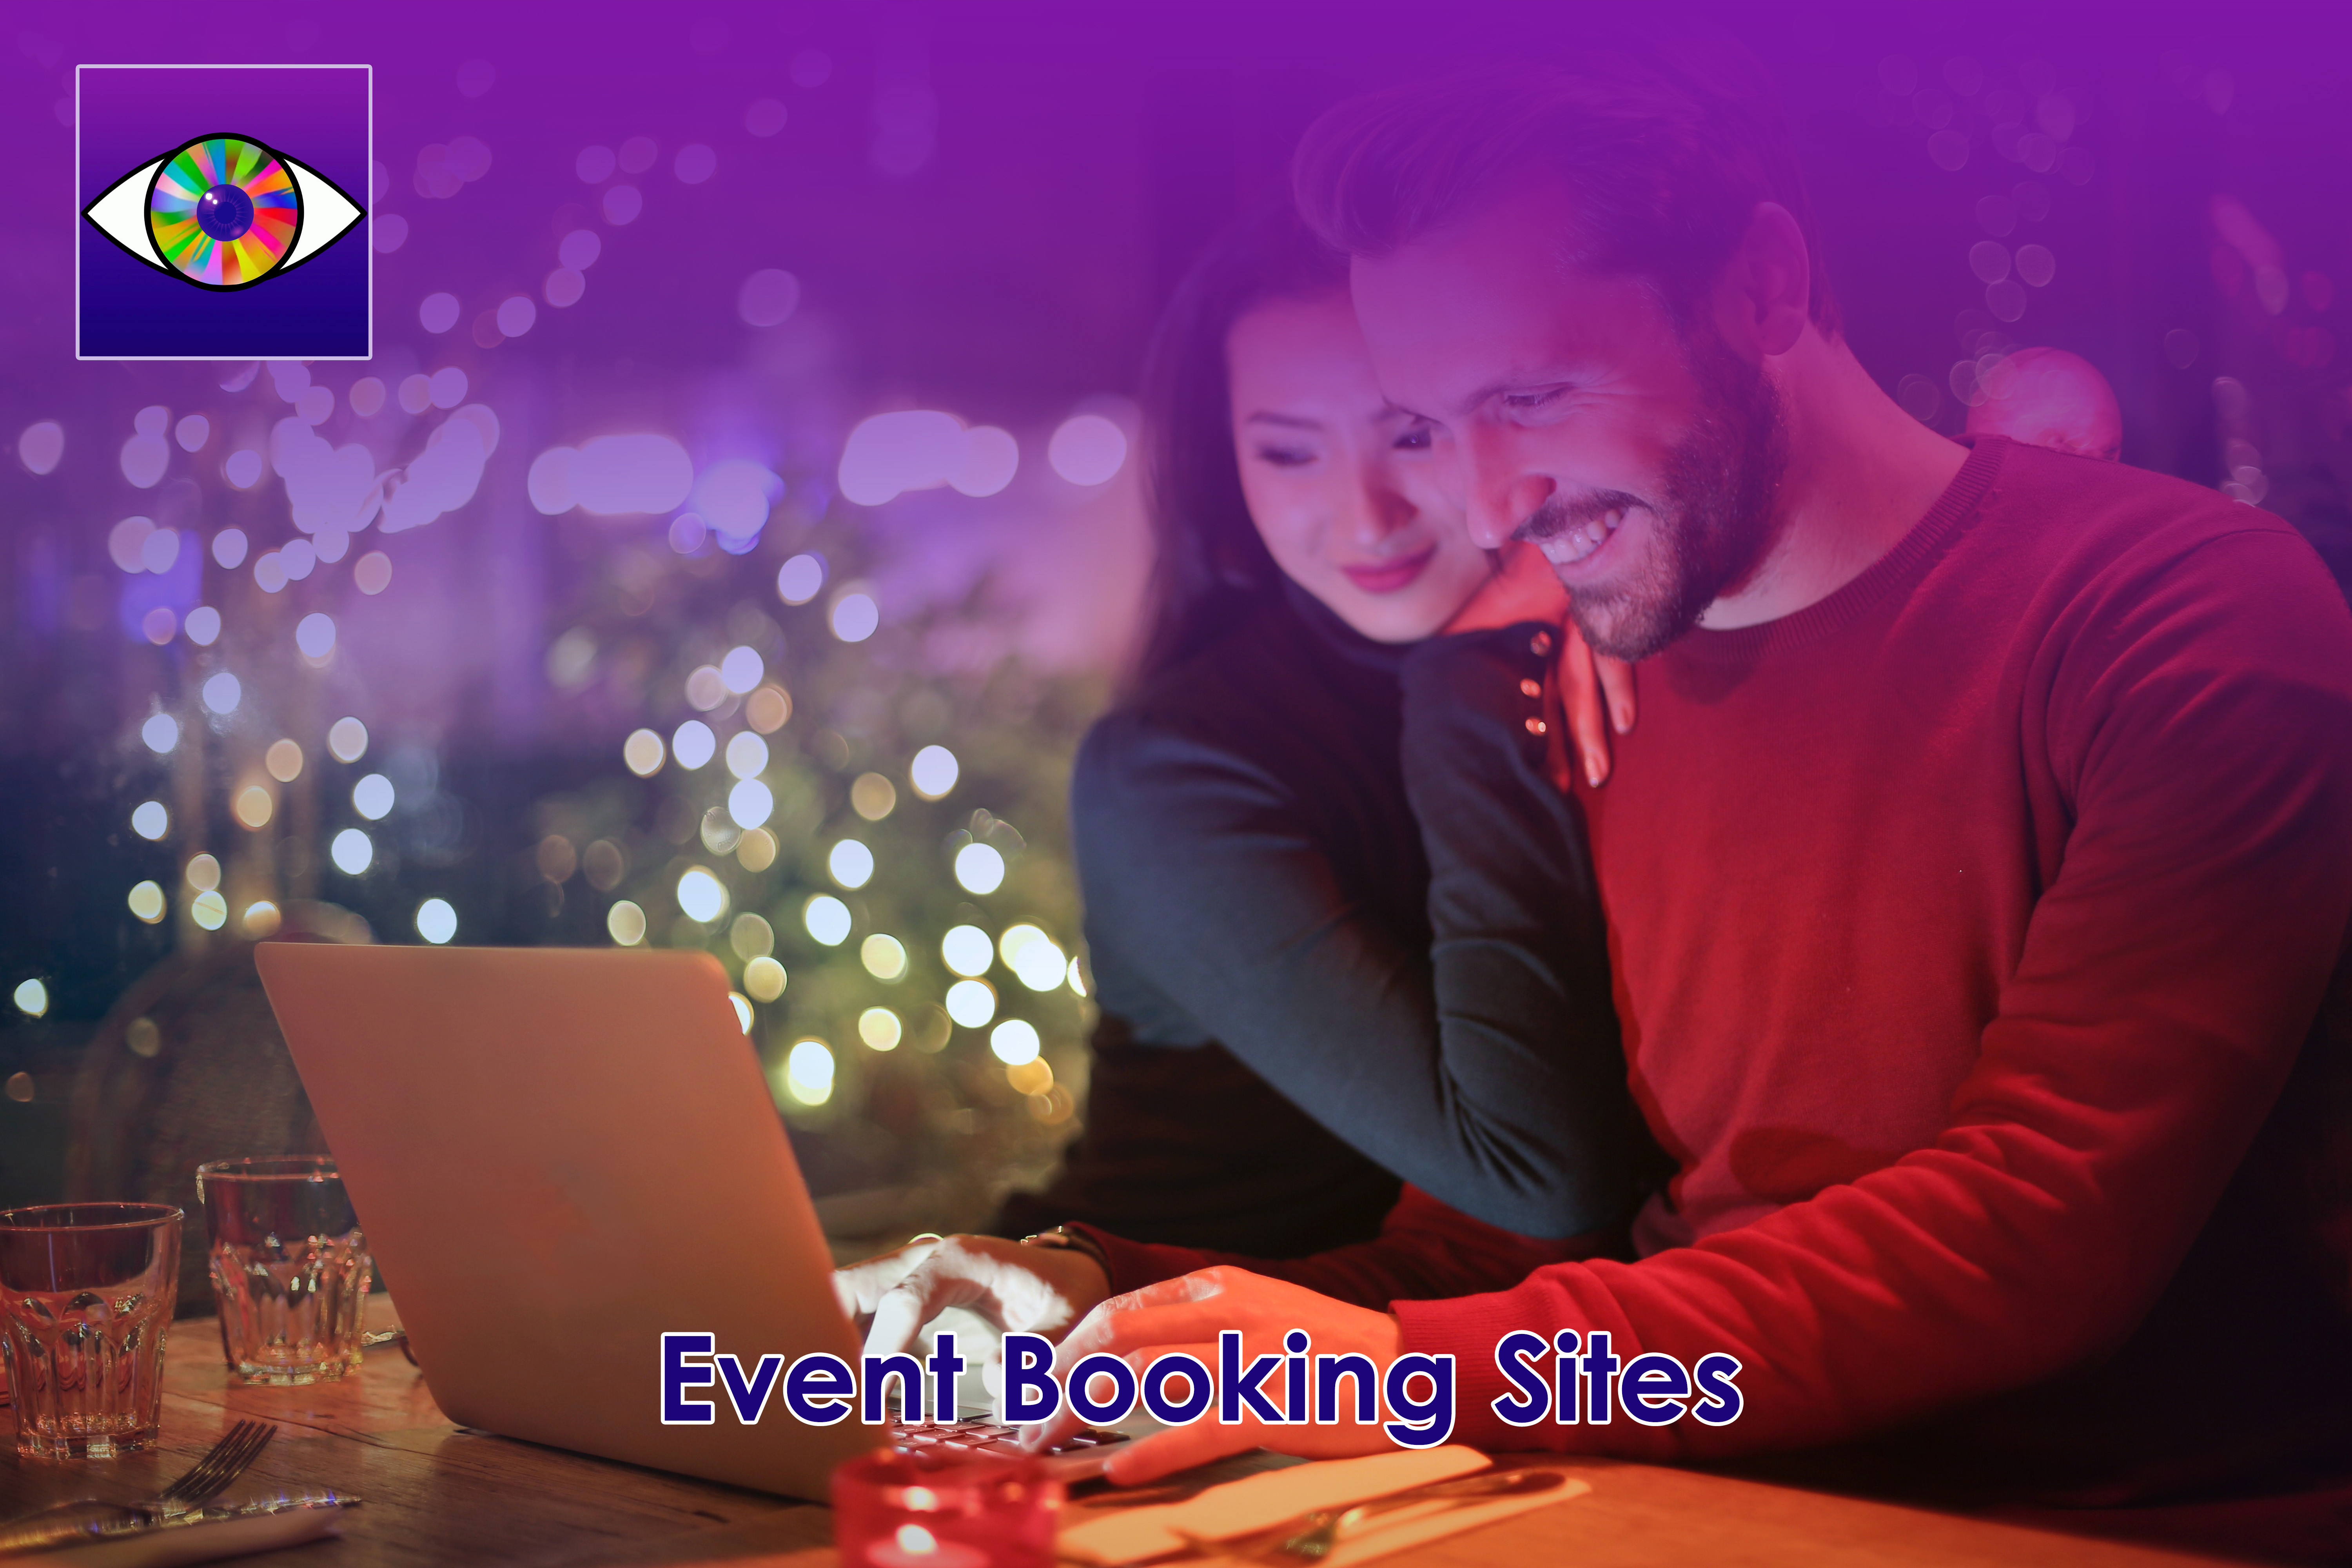 Importance of event booking sites